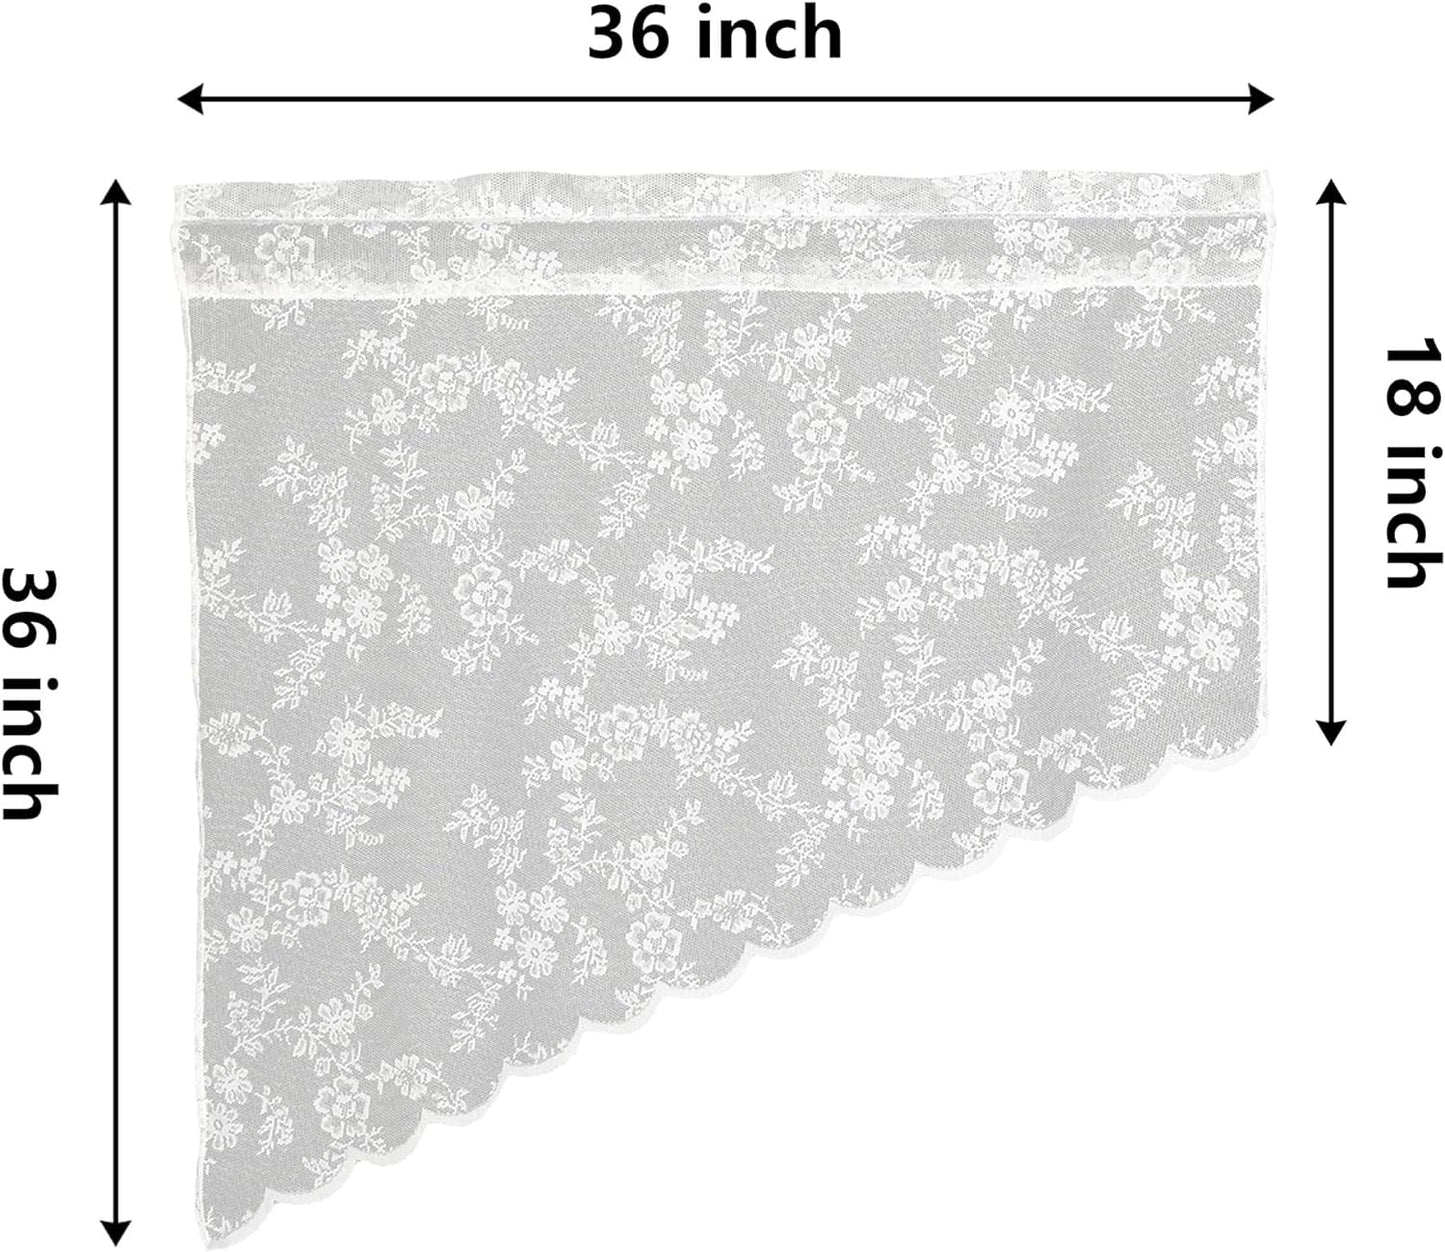 2 Pcs Floral Sheer Swag Curtains 36 Inches Length Rod Pocket Half Small Cafe Window Curtains White Retro Lace Swag Valance Kitchen Curtains, 36X36 Inches